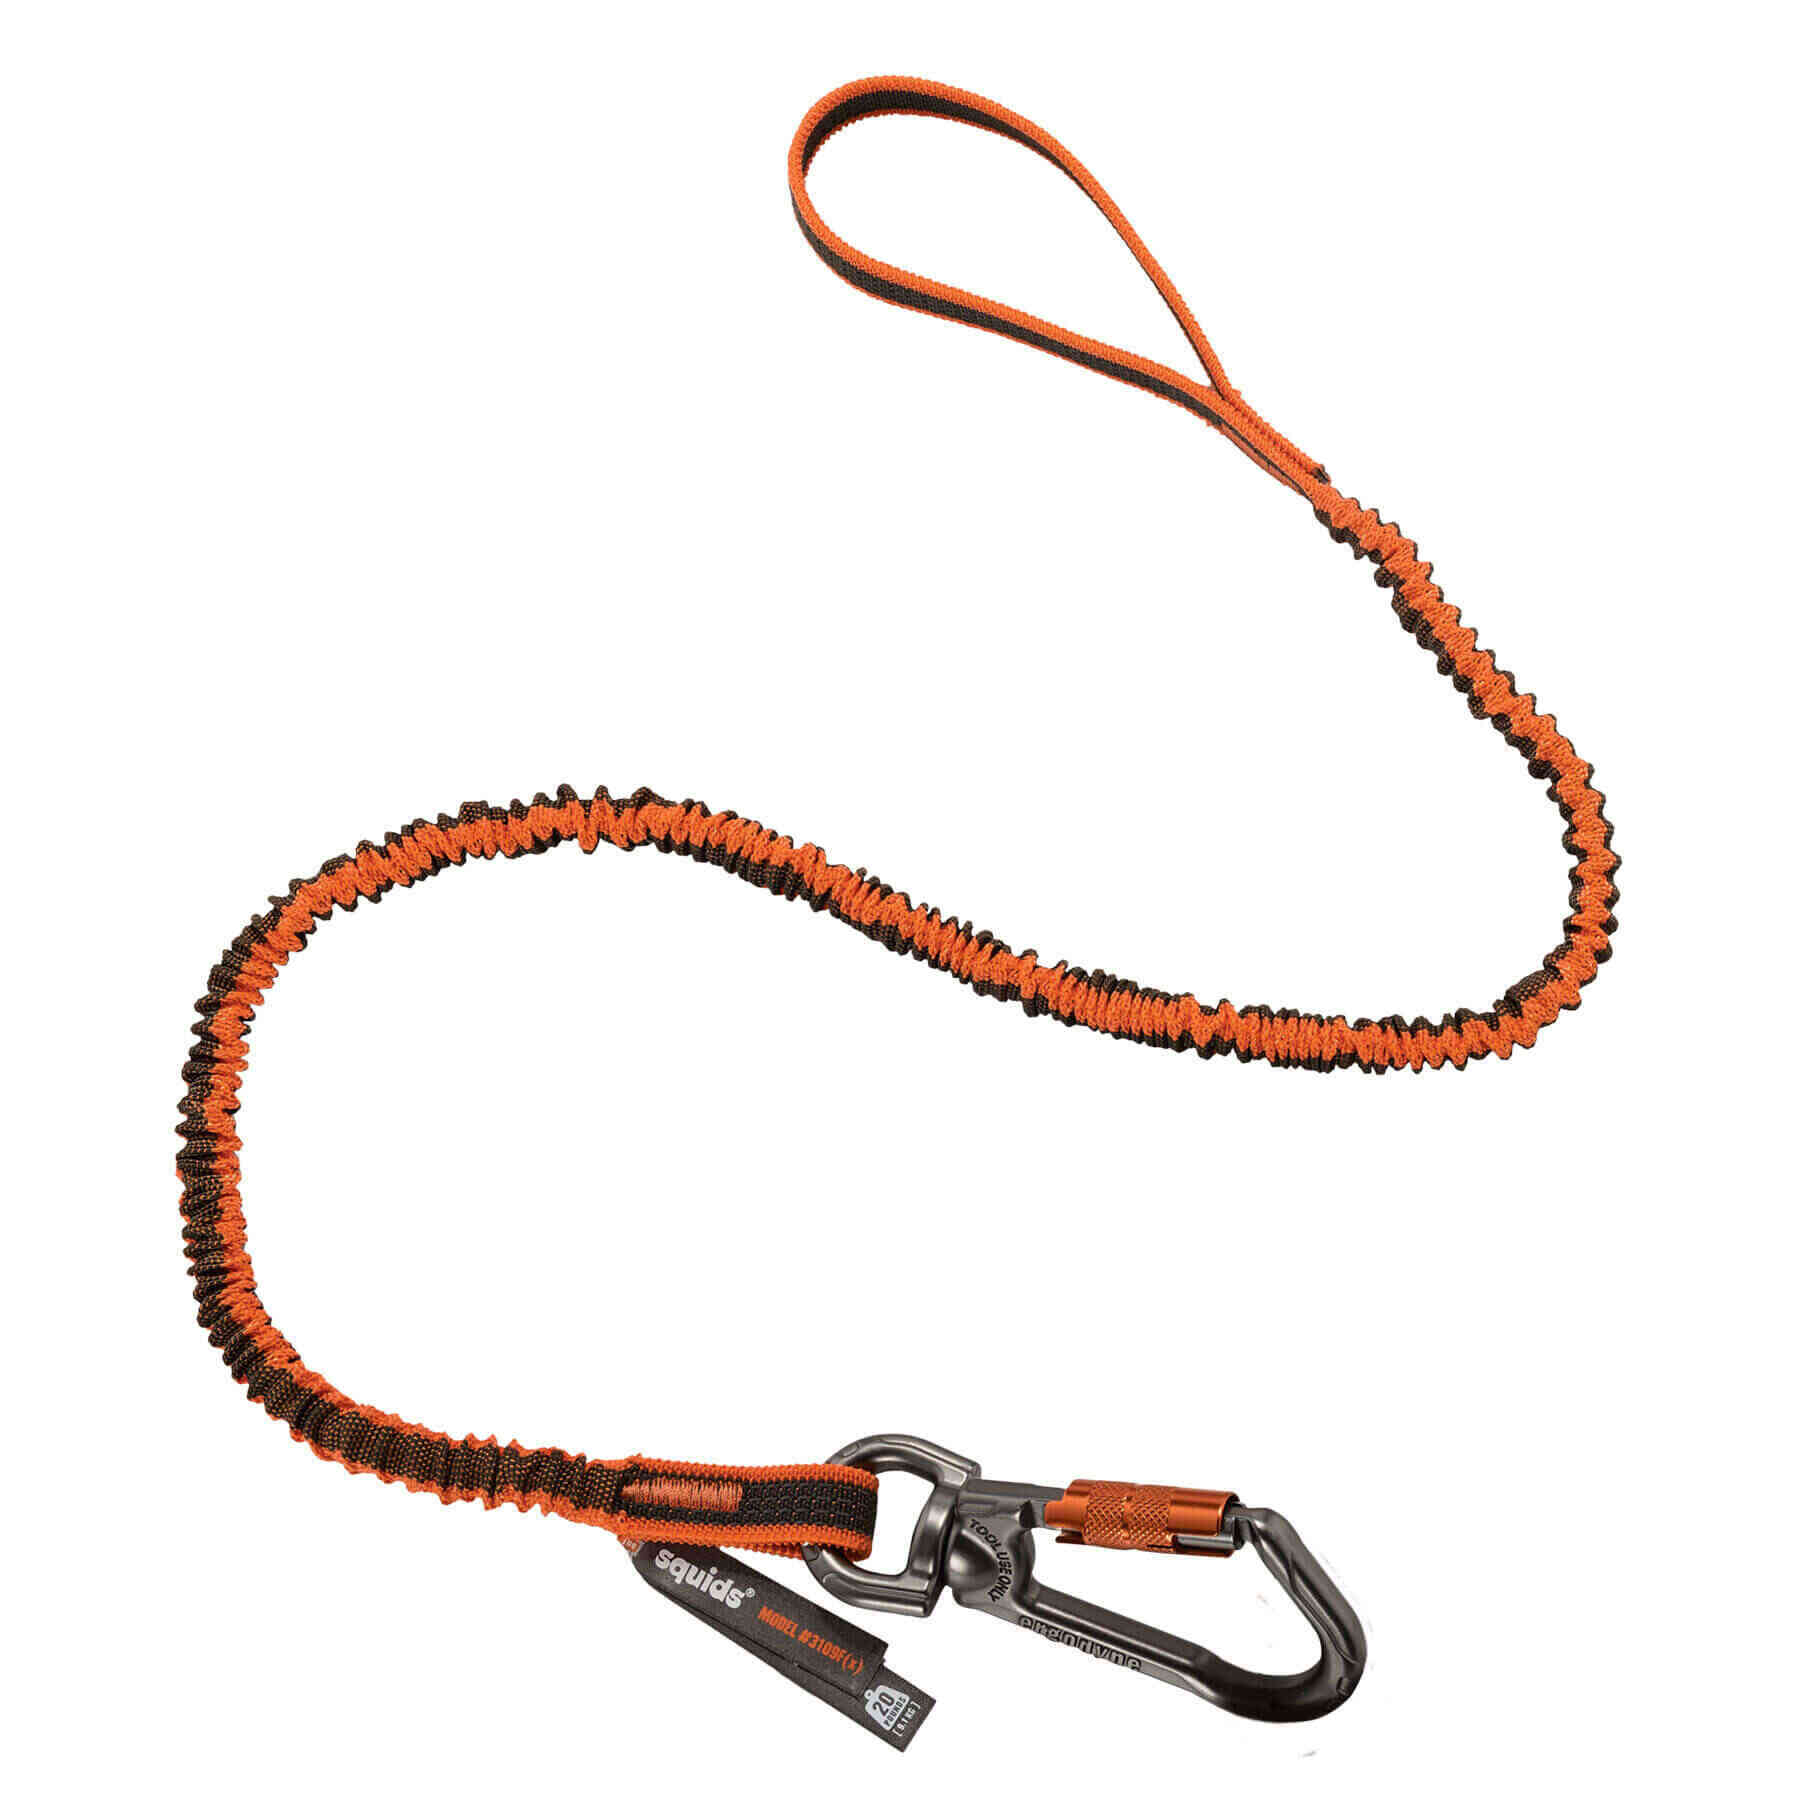 Squids 3109F(x) Double Action Single Carabiner Tool Lanyard with Swivel - 25lbs